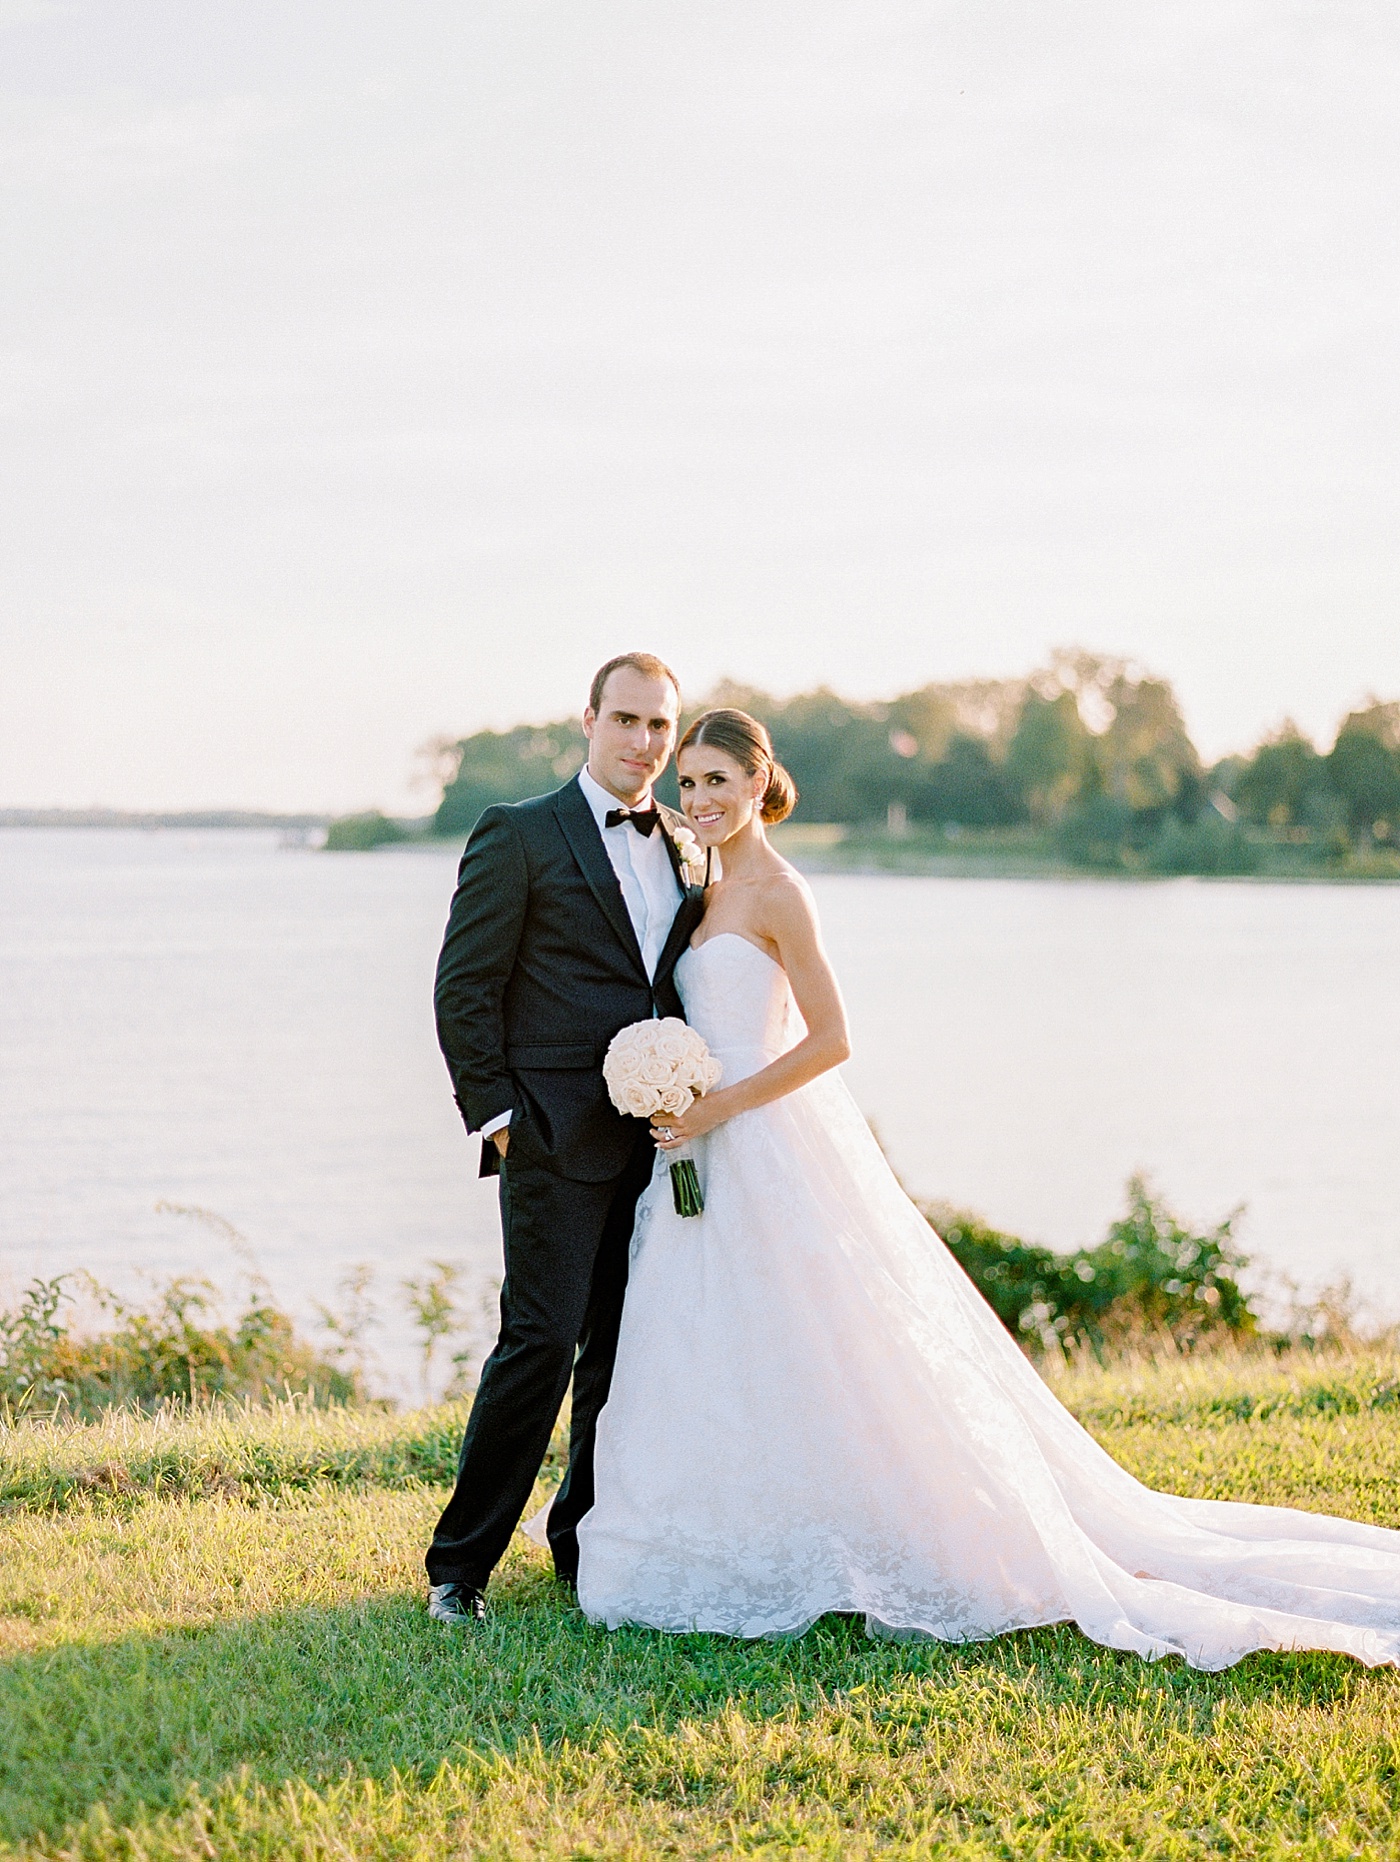 A beautiful waterfront wedding in Annapolis, Maryland at Whitehall